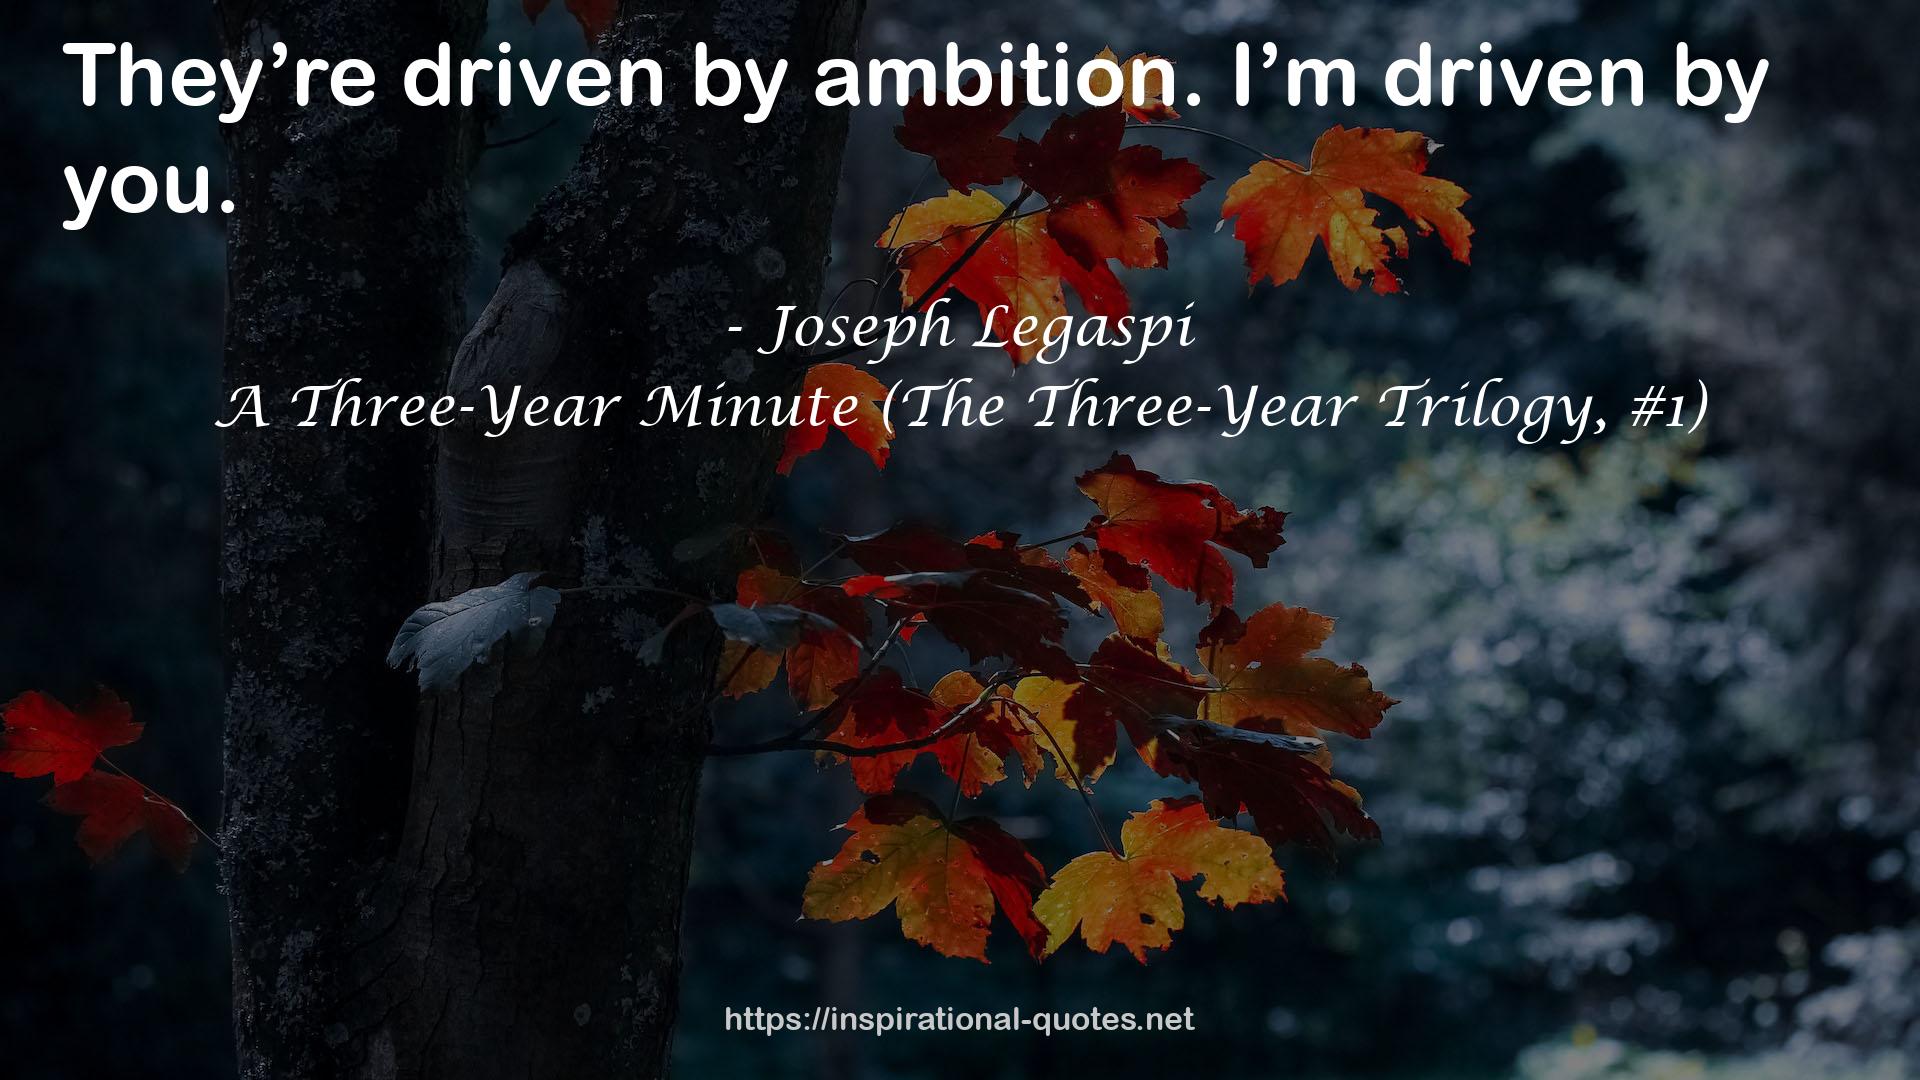 A Three-Year Minute (The Three-Year Trilogy, #1) QUOTES